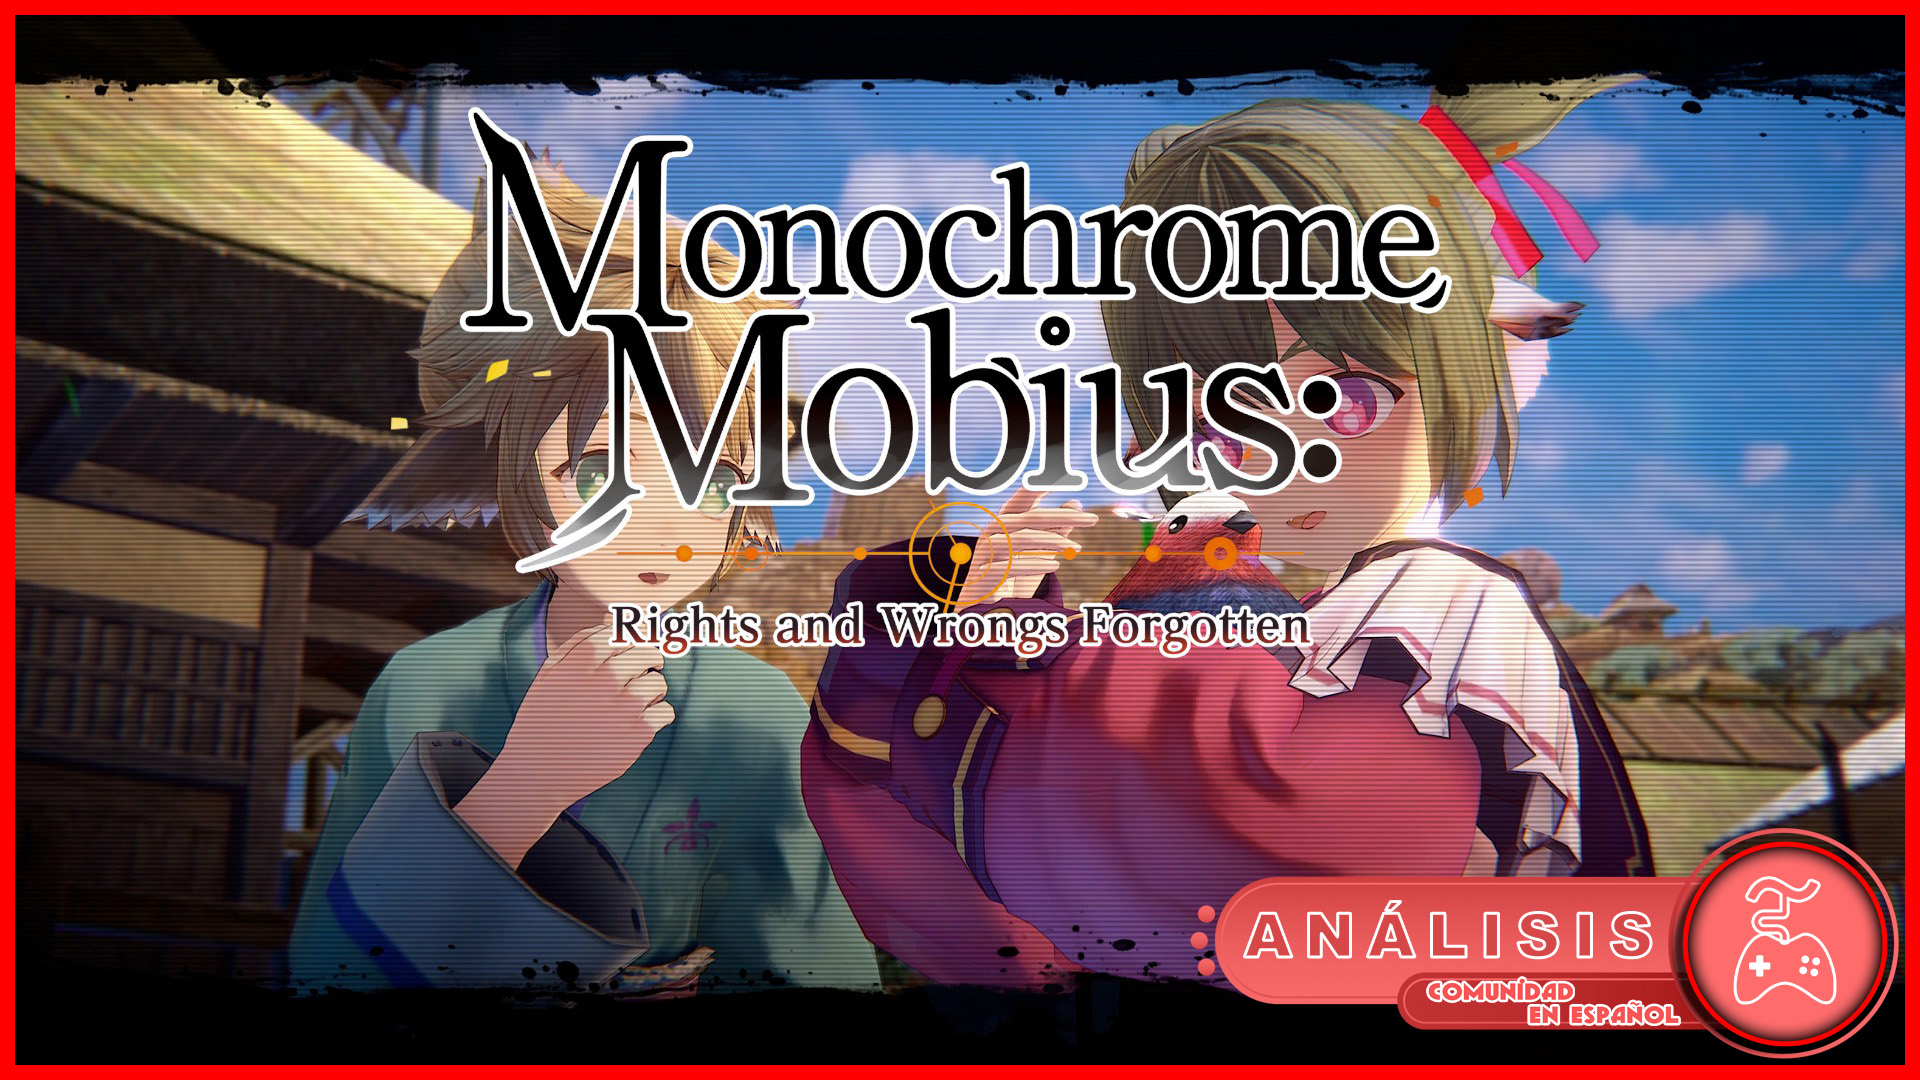 Monochrome Mobius: Rights and Wrongs Forghotten - Análisis